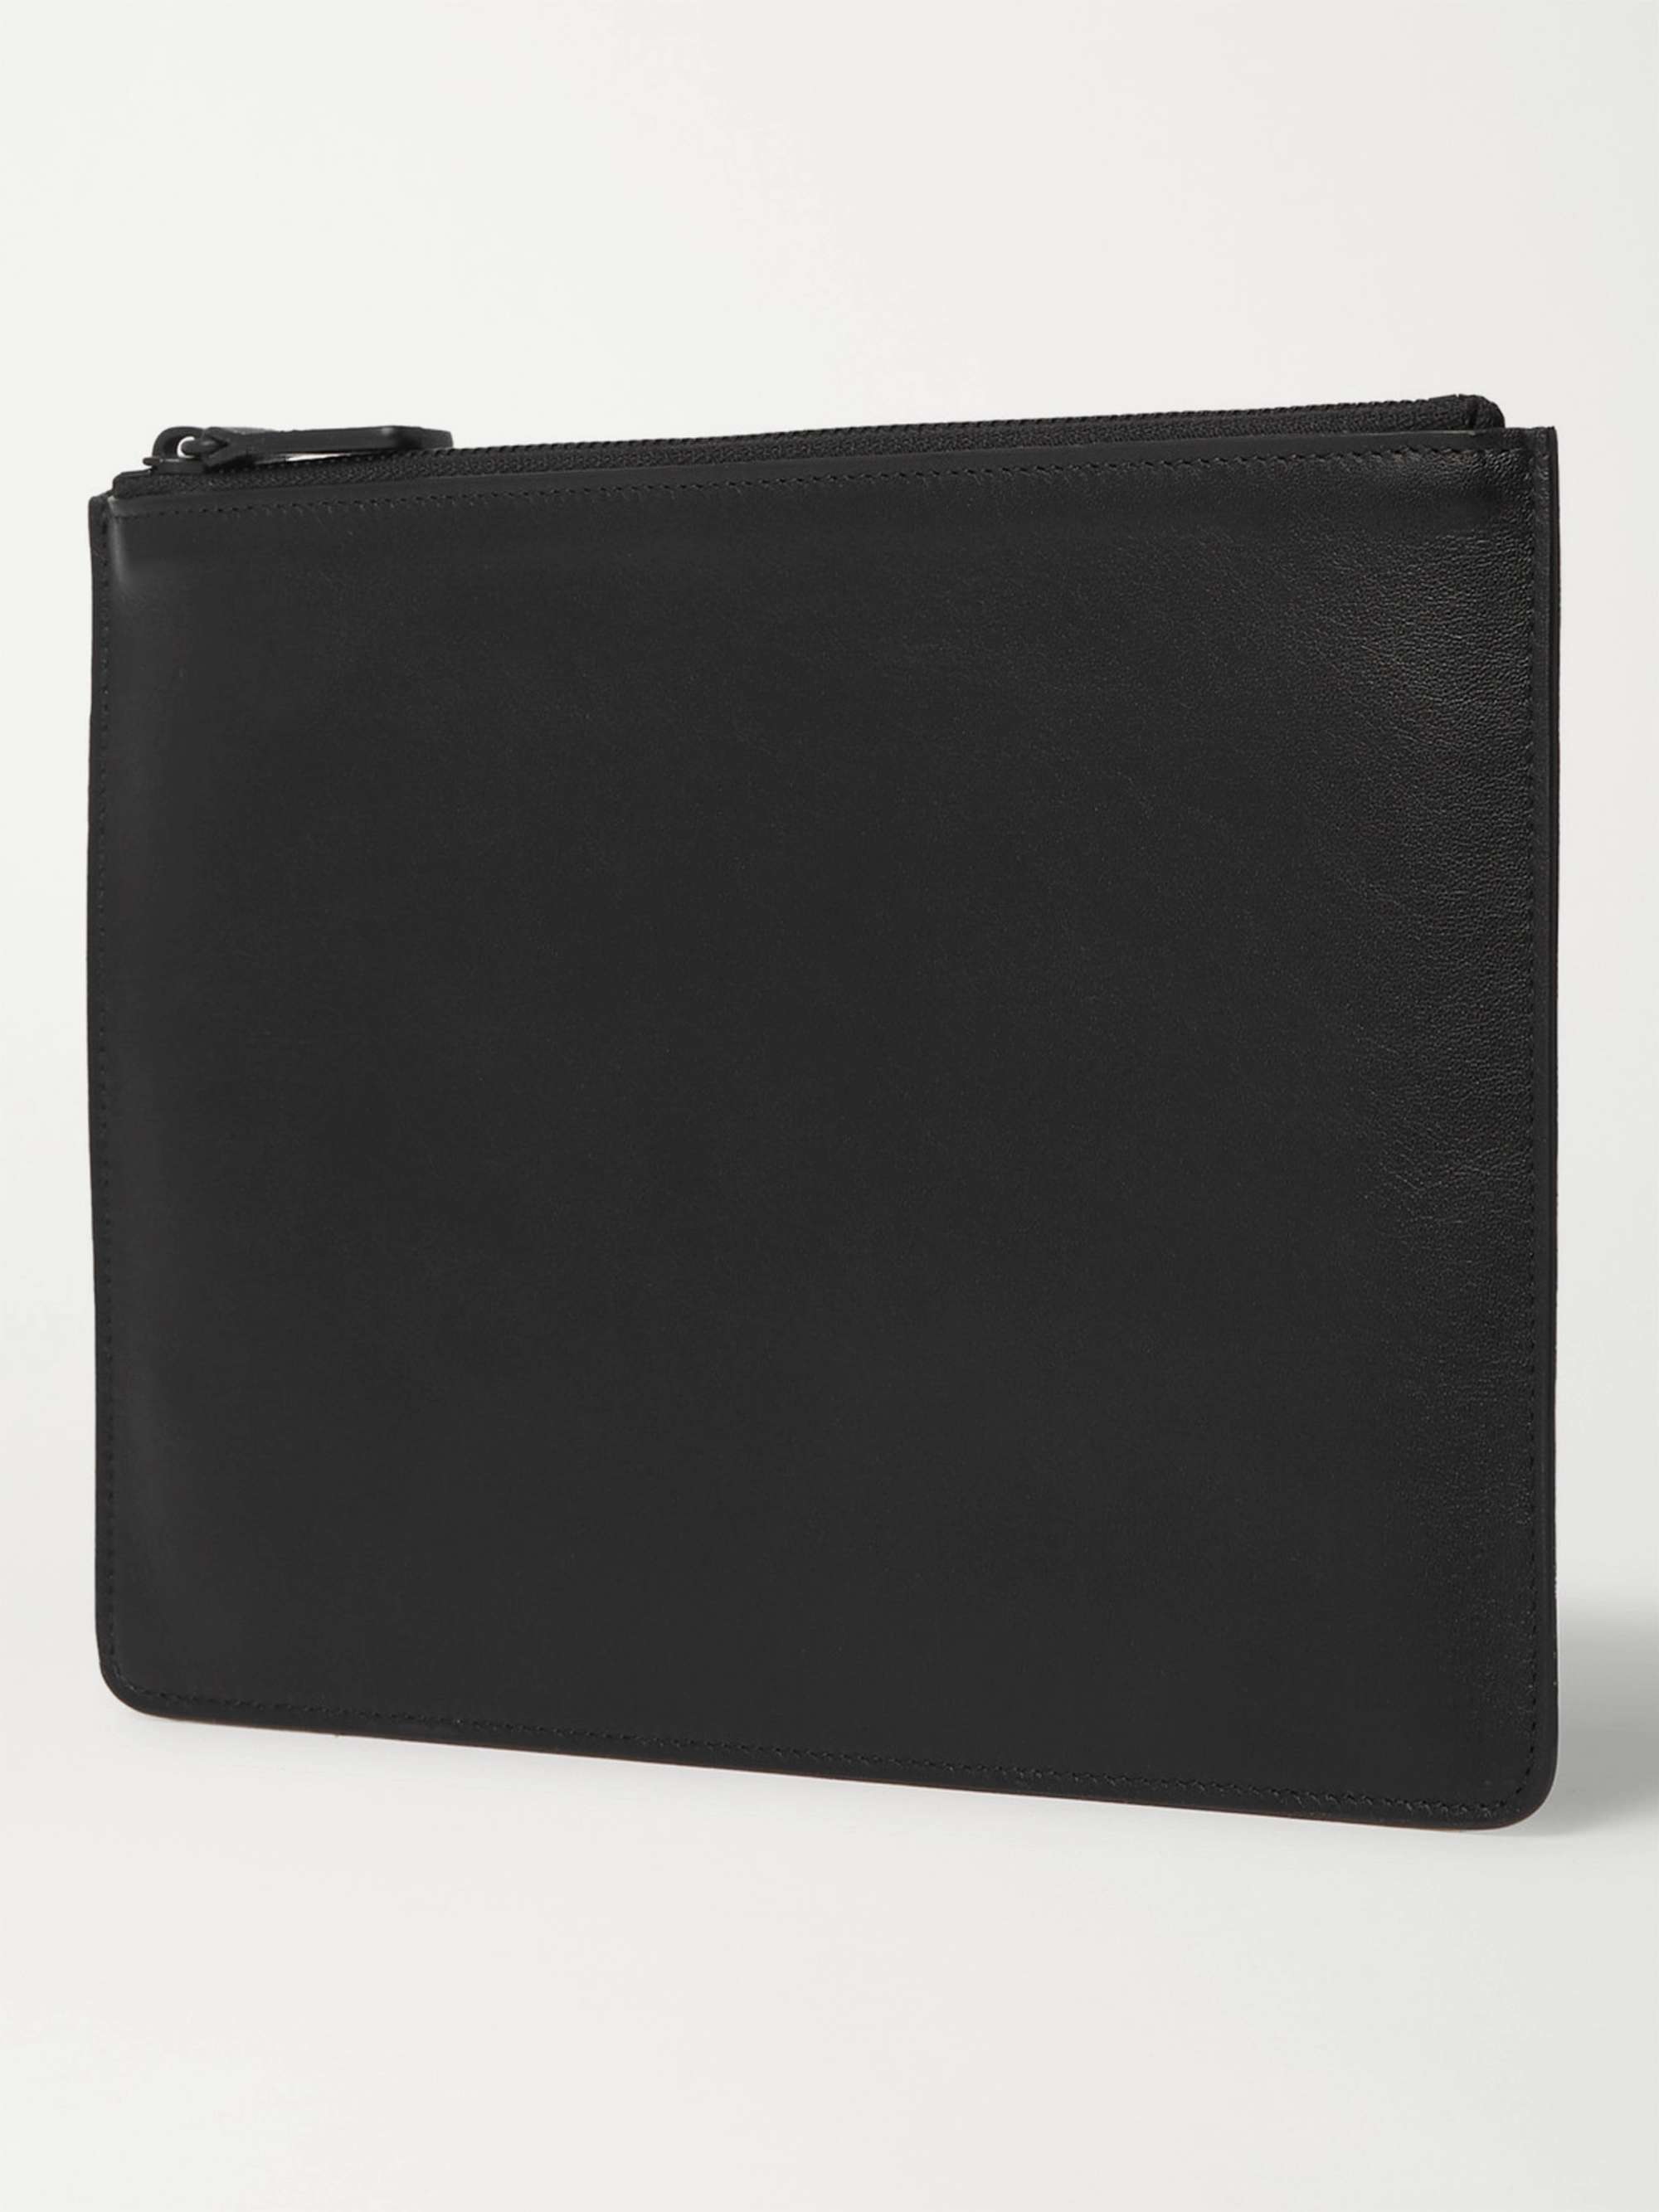 COMMON PROJECTS Leather Pouch